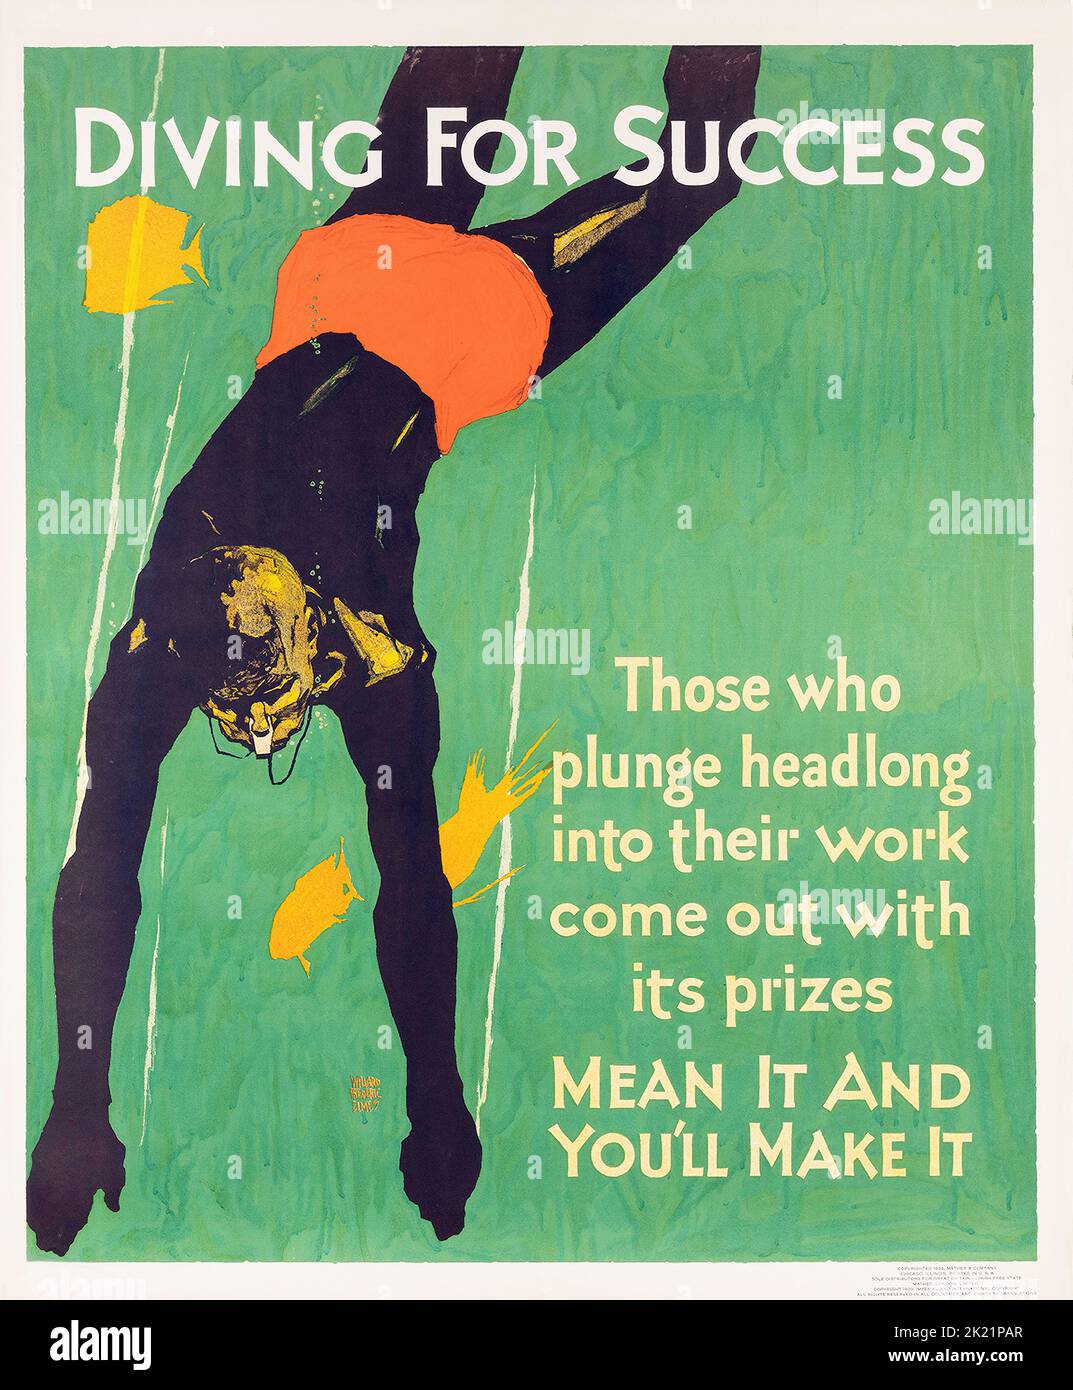 Willard Frederic Elmes Diving for Success Motivationales Poster Stockfoto